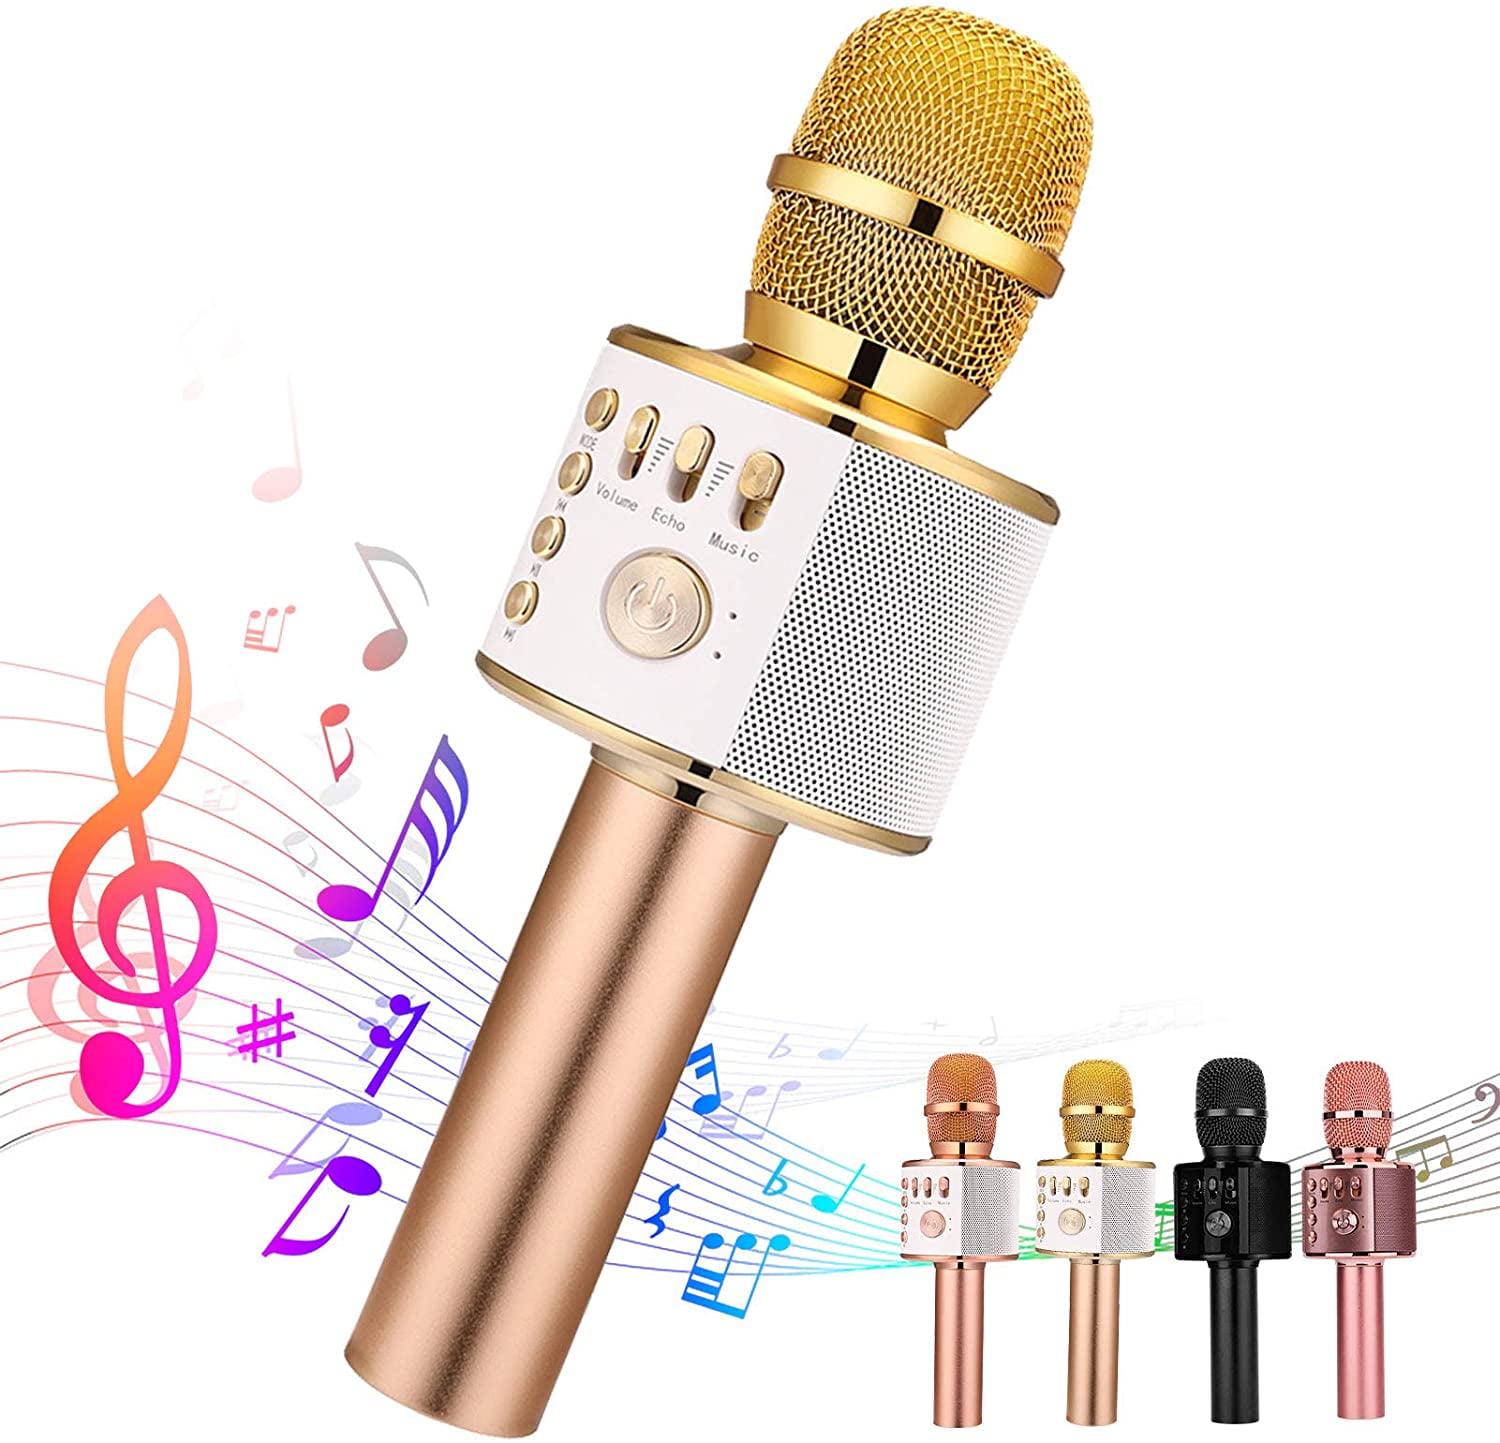 Compatible with Android and iOS Devices Wireless Microphone,Karaoke machine Portable Bluetooth Microphone with Speaker Handheld Microphone for Home Party Singing and Conference